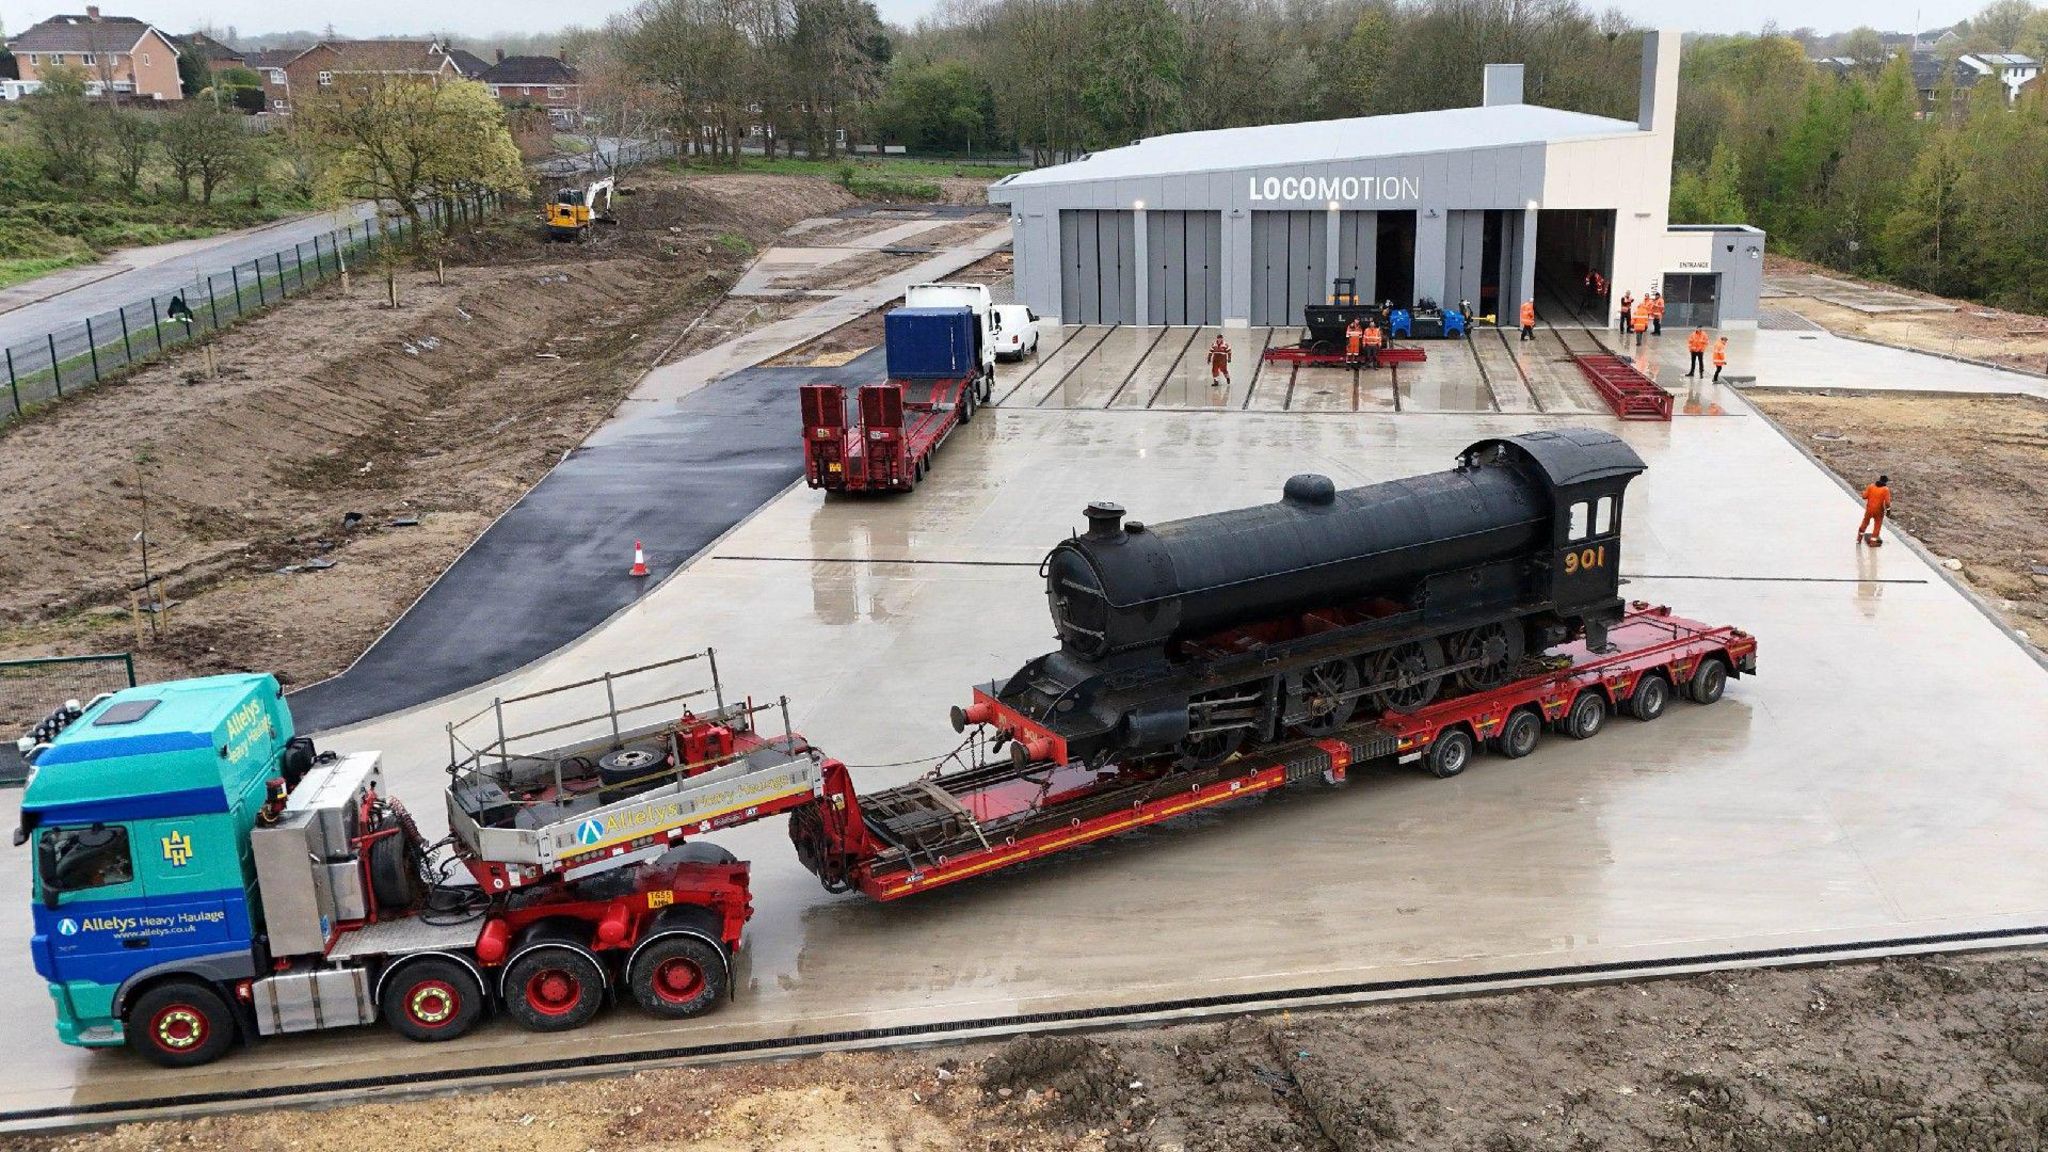 Aerial views of the Q7 locomotive as it is moved into Locomotion's £8m New Hall in in Shildon, County Durham as part of the National Railway Museum's biggest ever shunt of 46 vehicles.